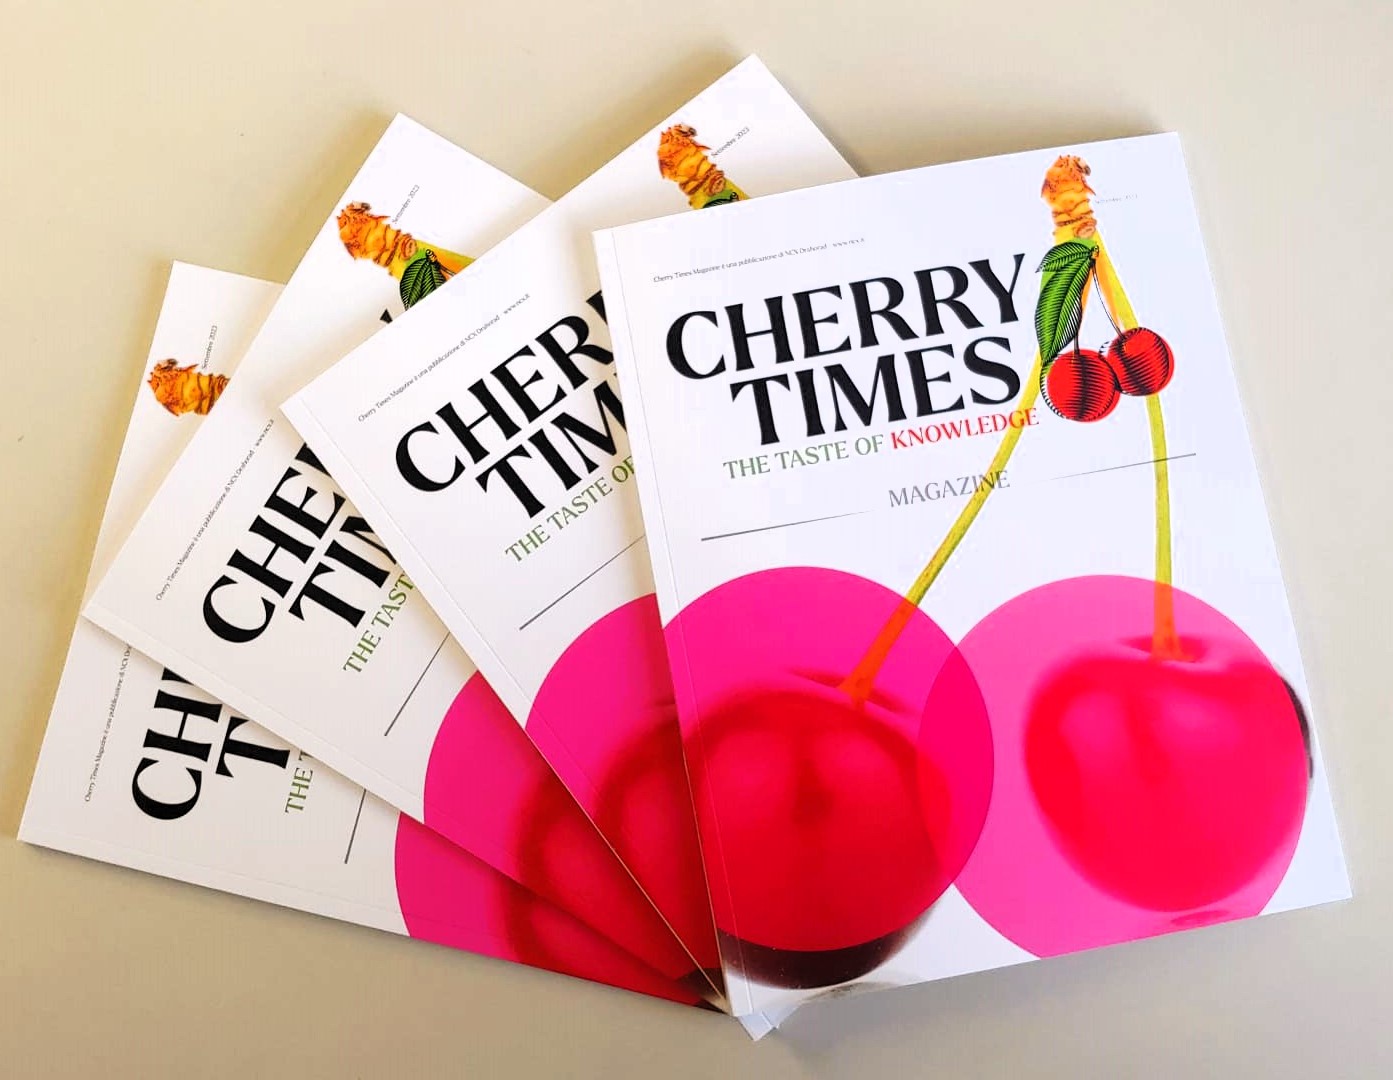 Read and download the new Cherry Times magazine